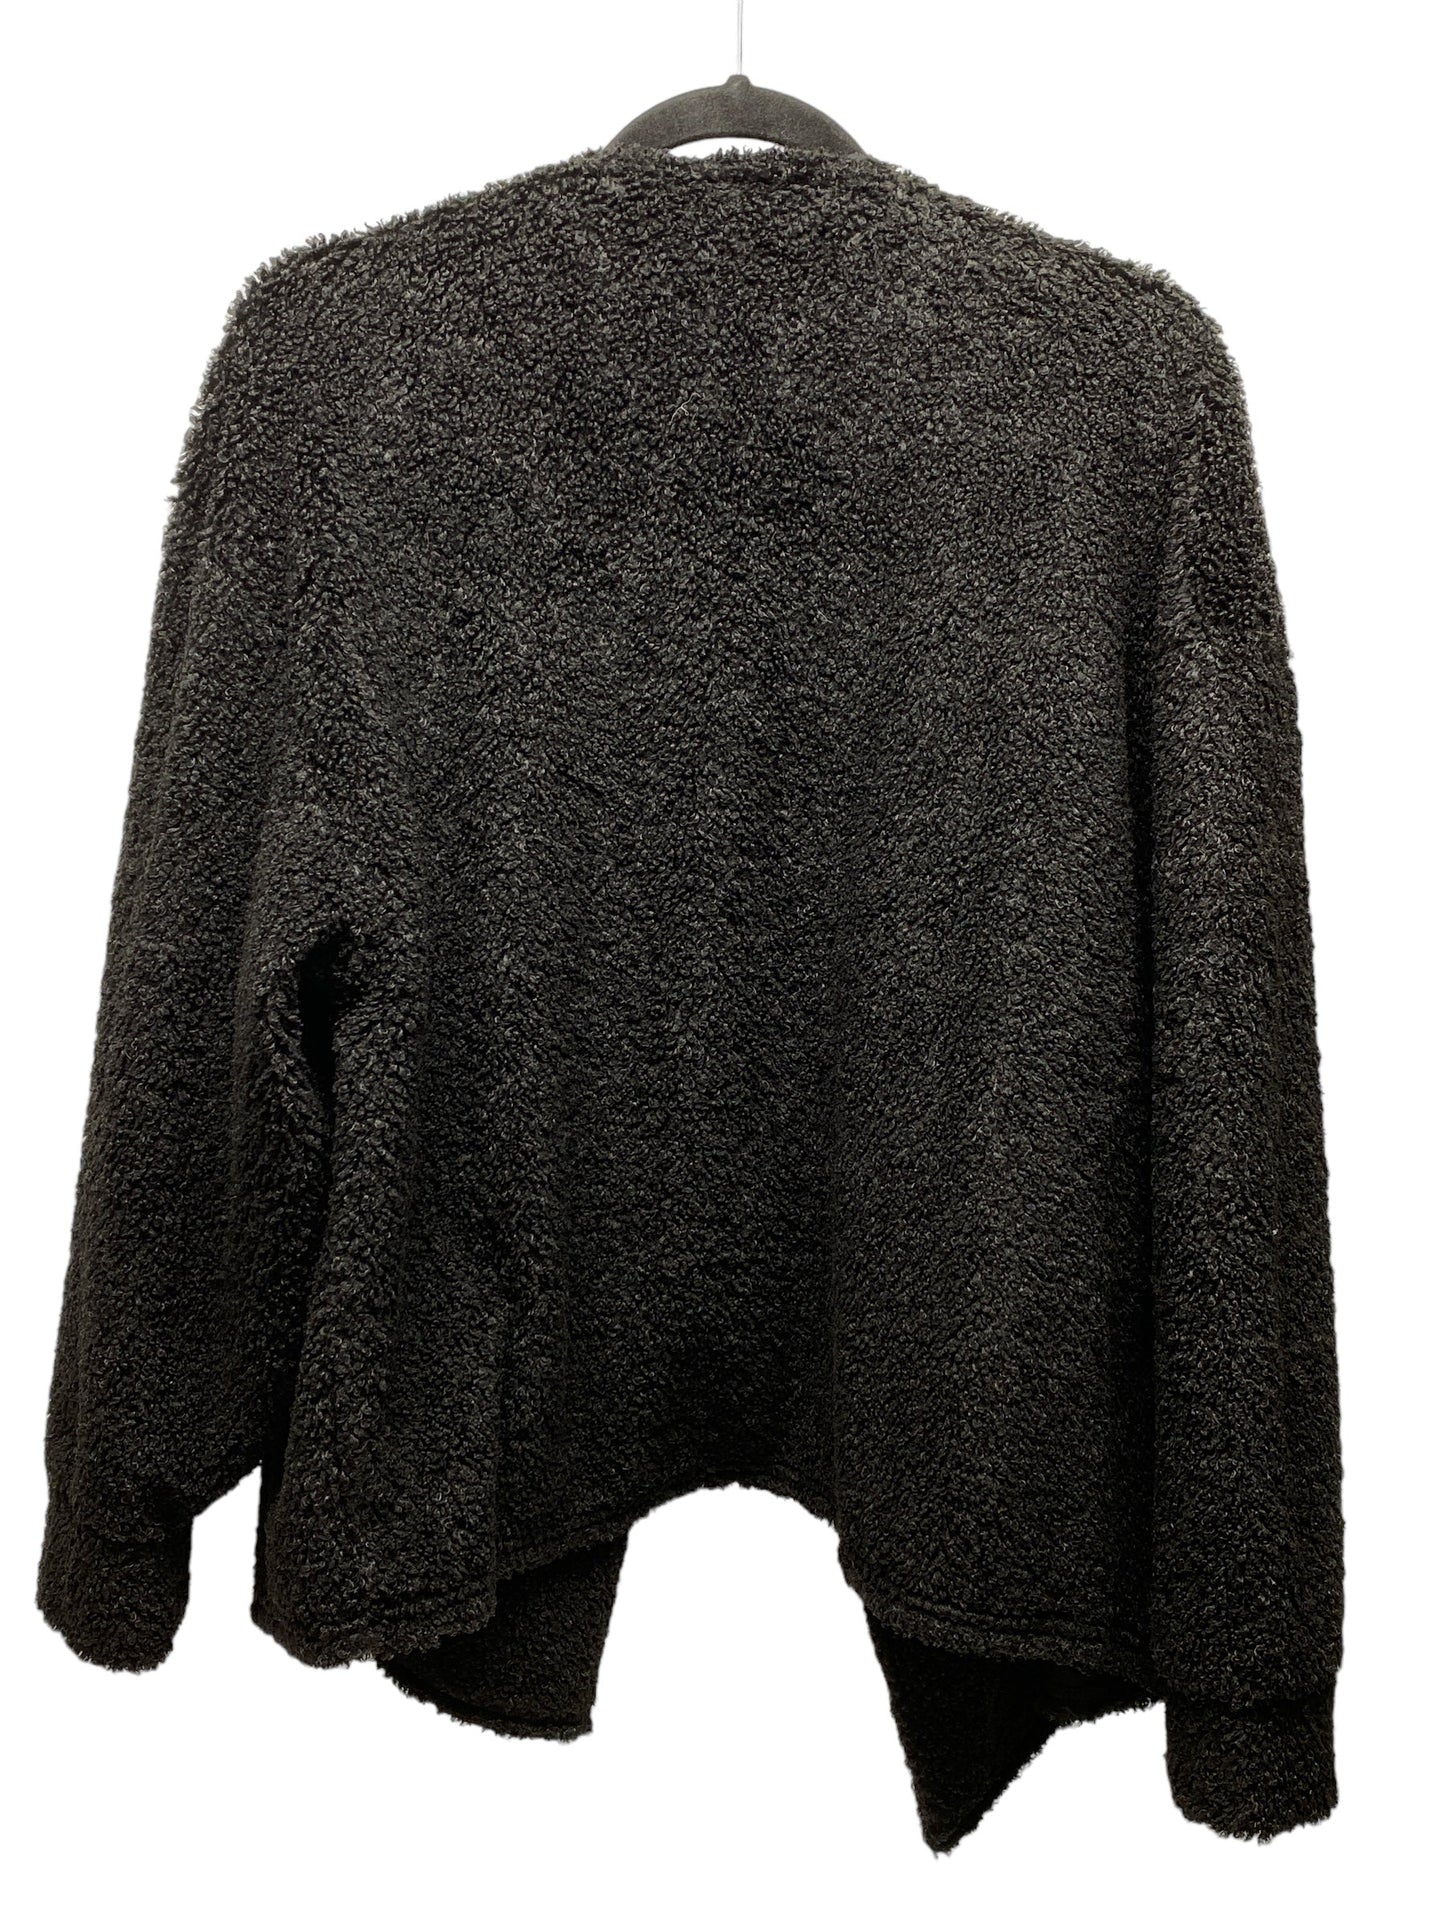 Cardigan By Express  Size: M